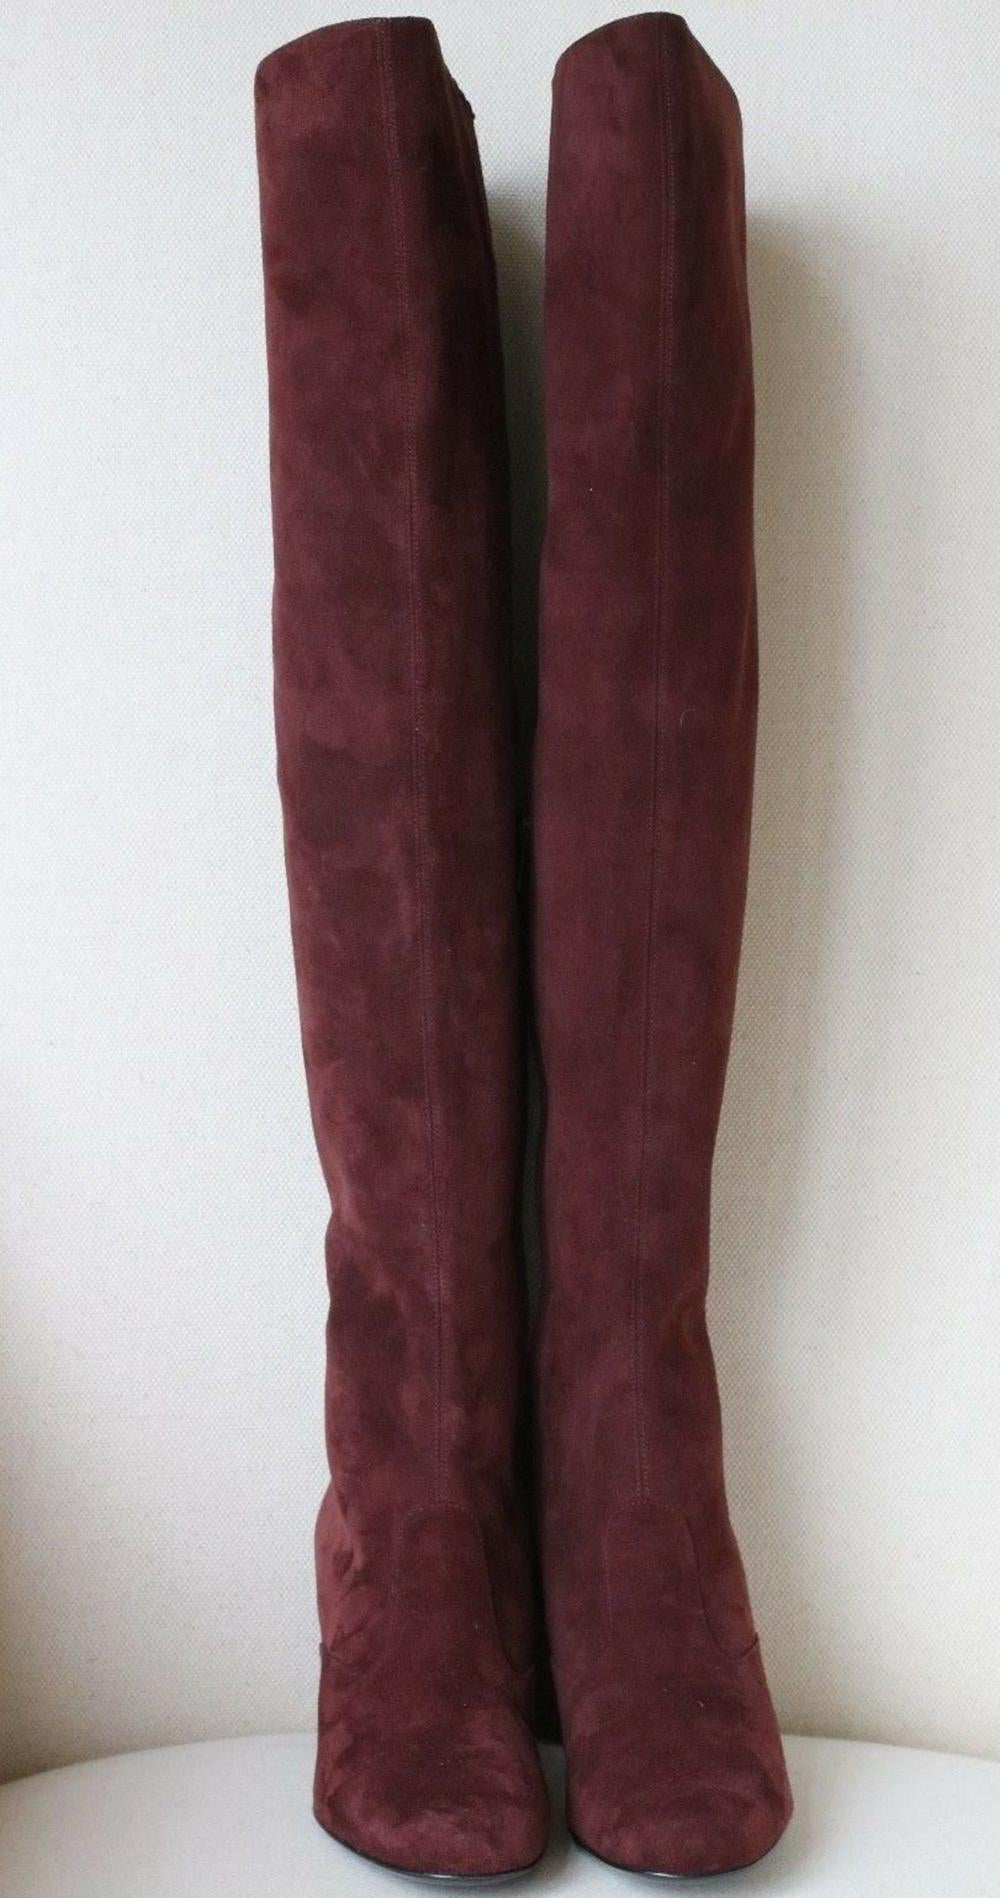 The knee-high boot is a season essential, and Saint Laurent champions the style with these brand new block-heel. They're made from burgundy lamb-suede and shaped with a vintage-inspired square toe and a small, chunky heel. 100% Lambskin.

Size: EU